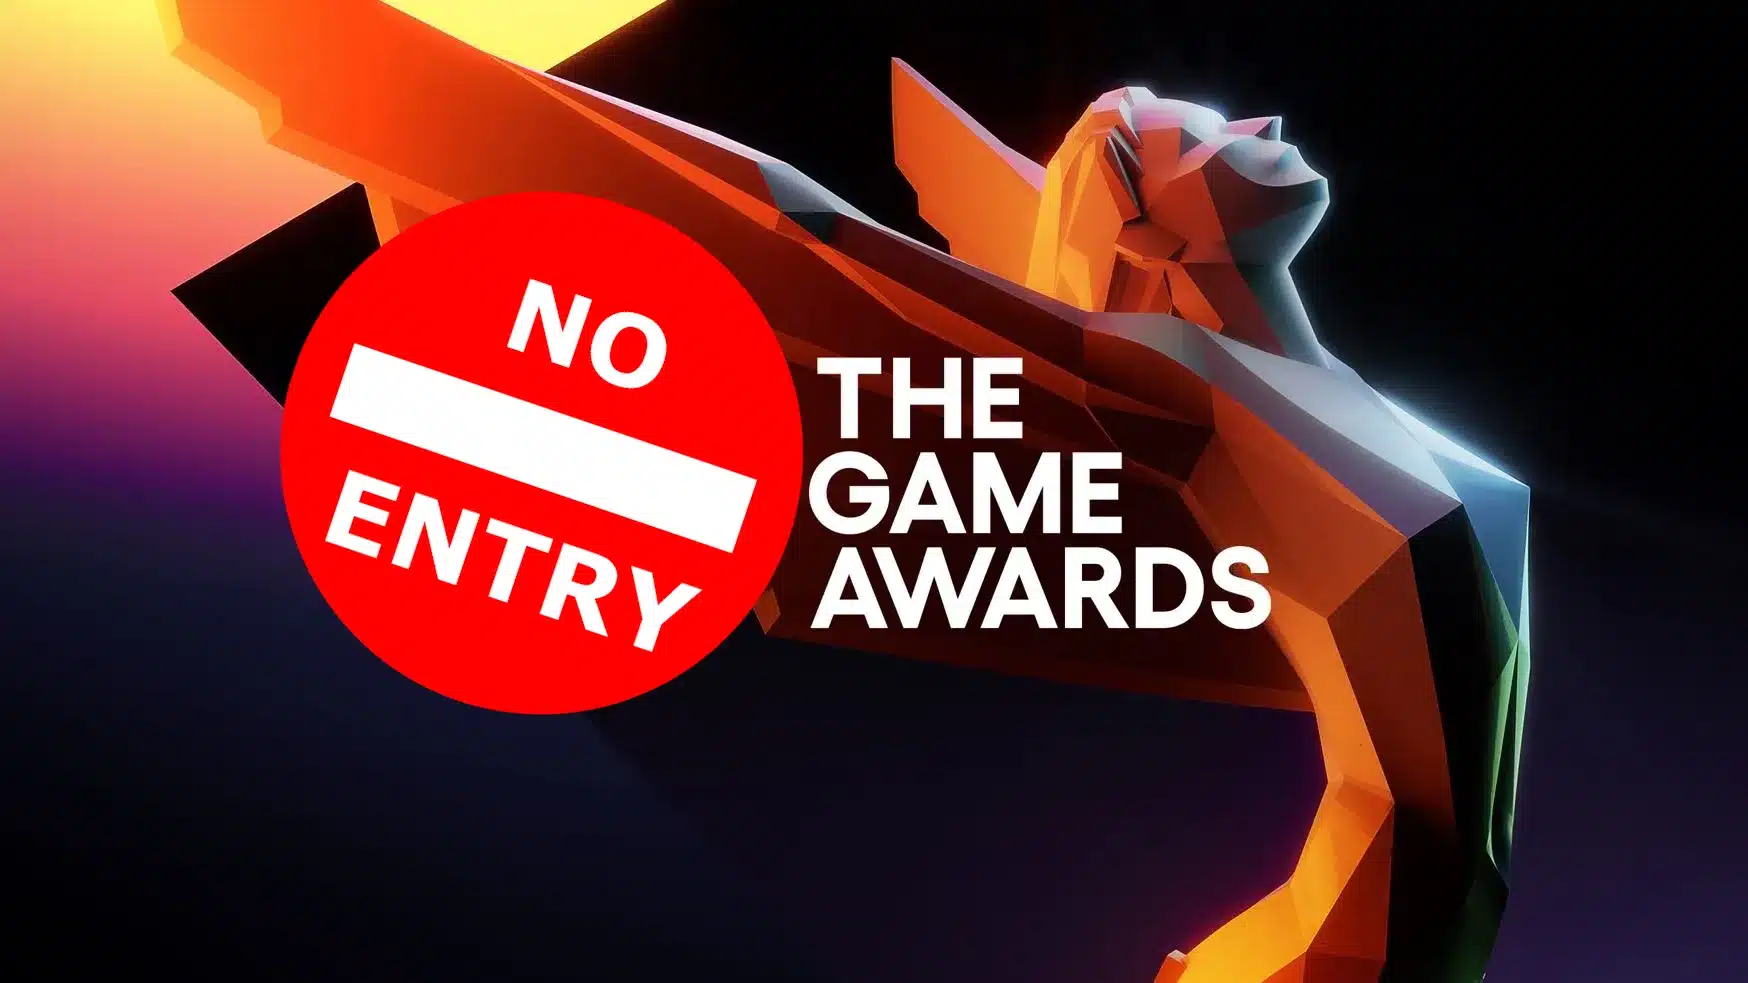 TGA 2022 - The Game Awards GOTY Nominees, How to Vote